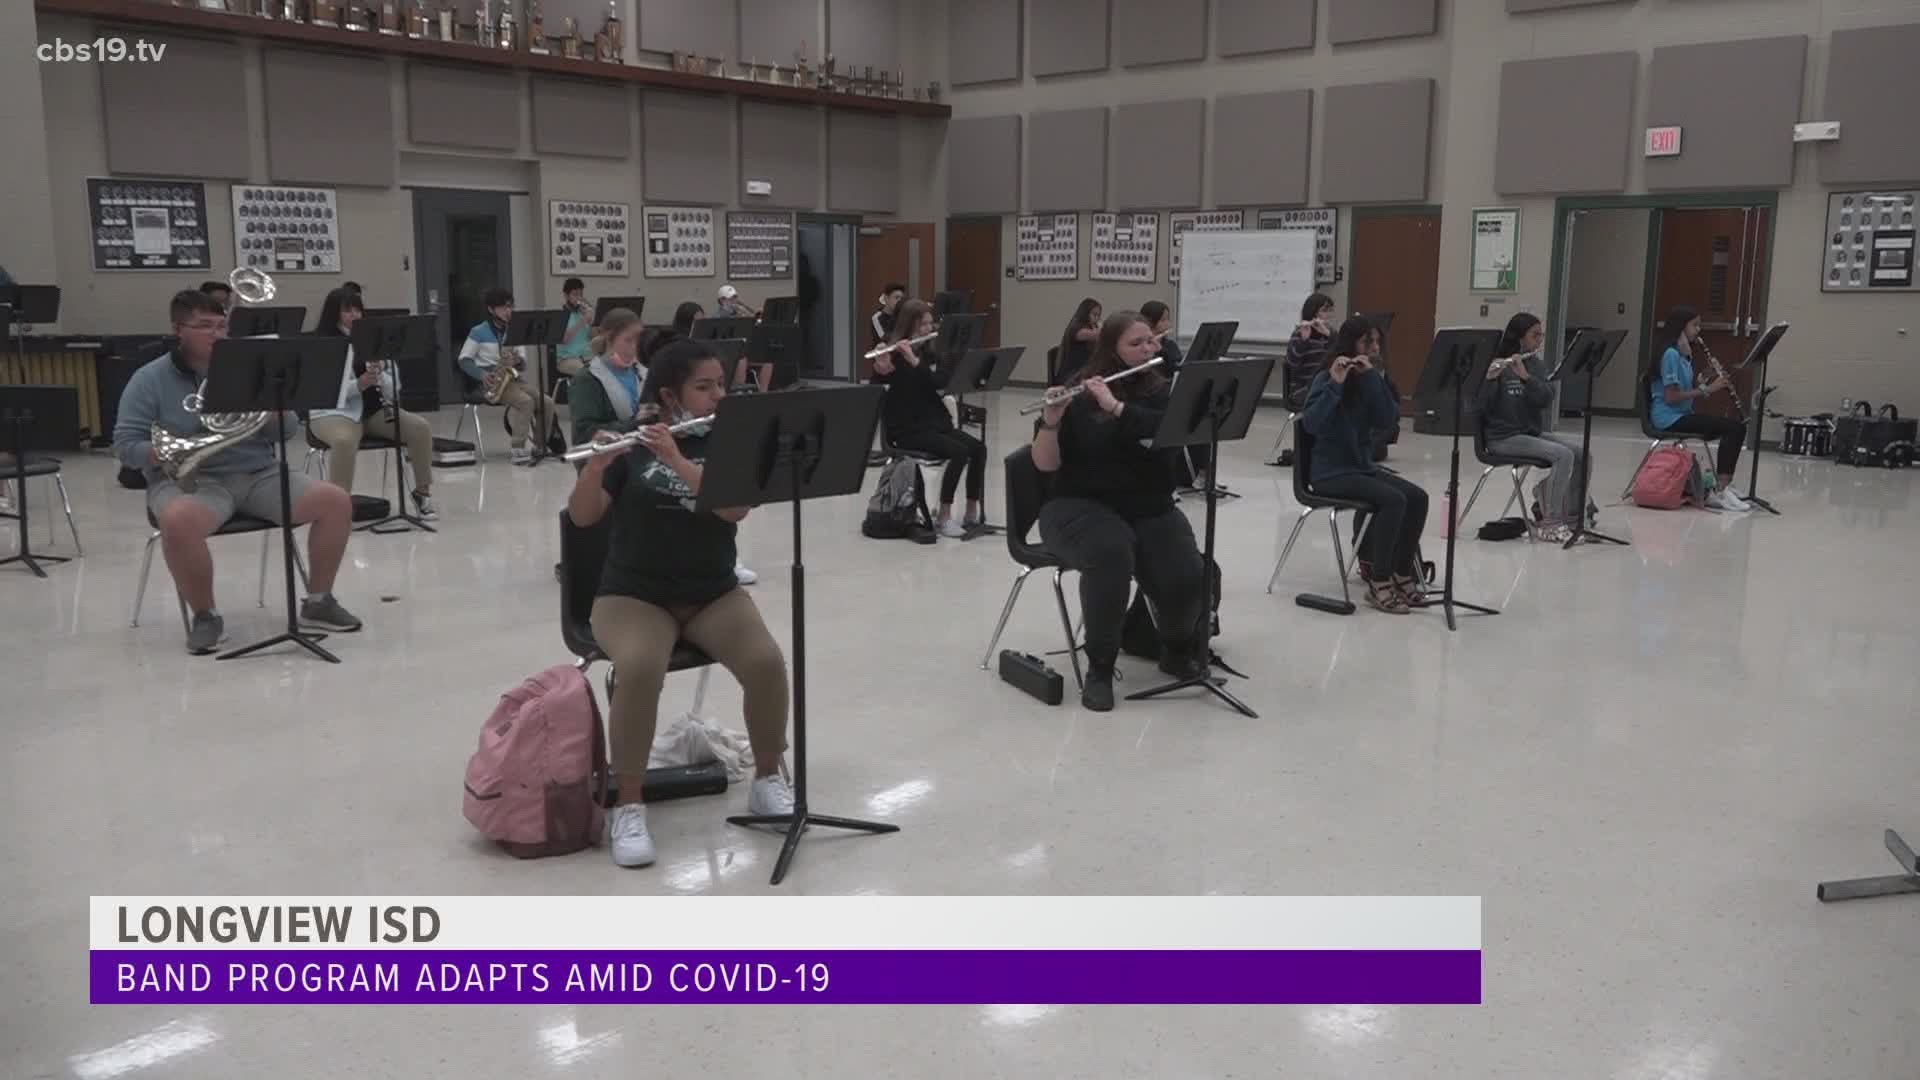 Longview ISD's band program adapts to changes amid COVID-19 pandemic.